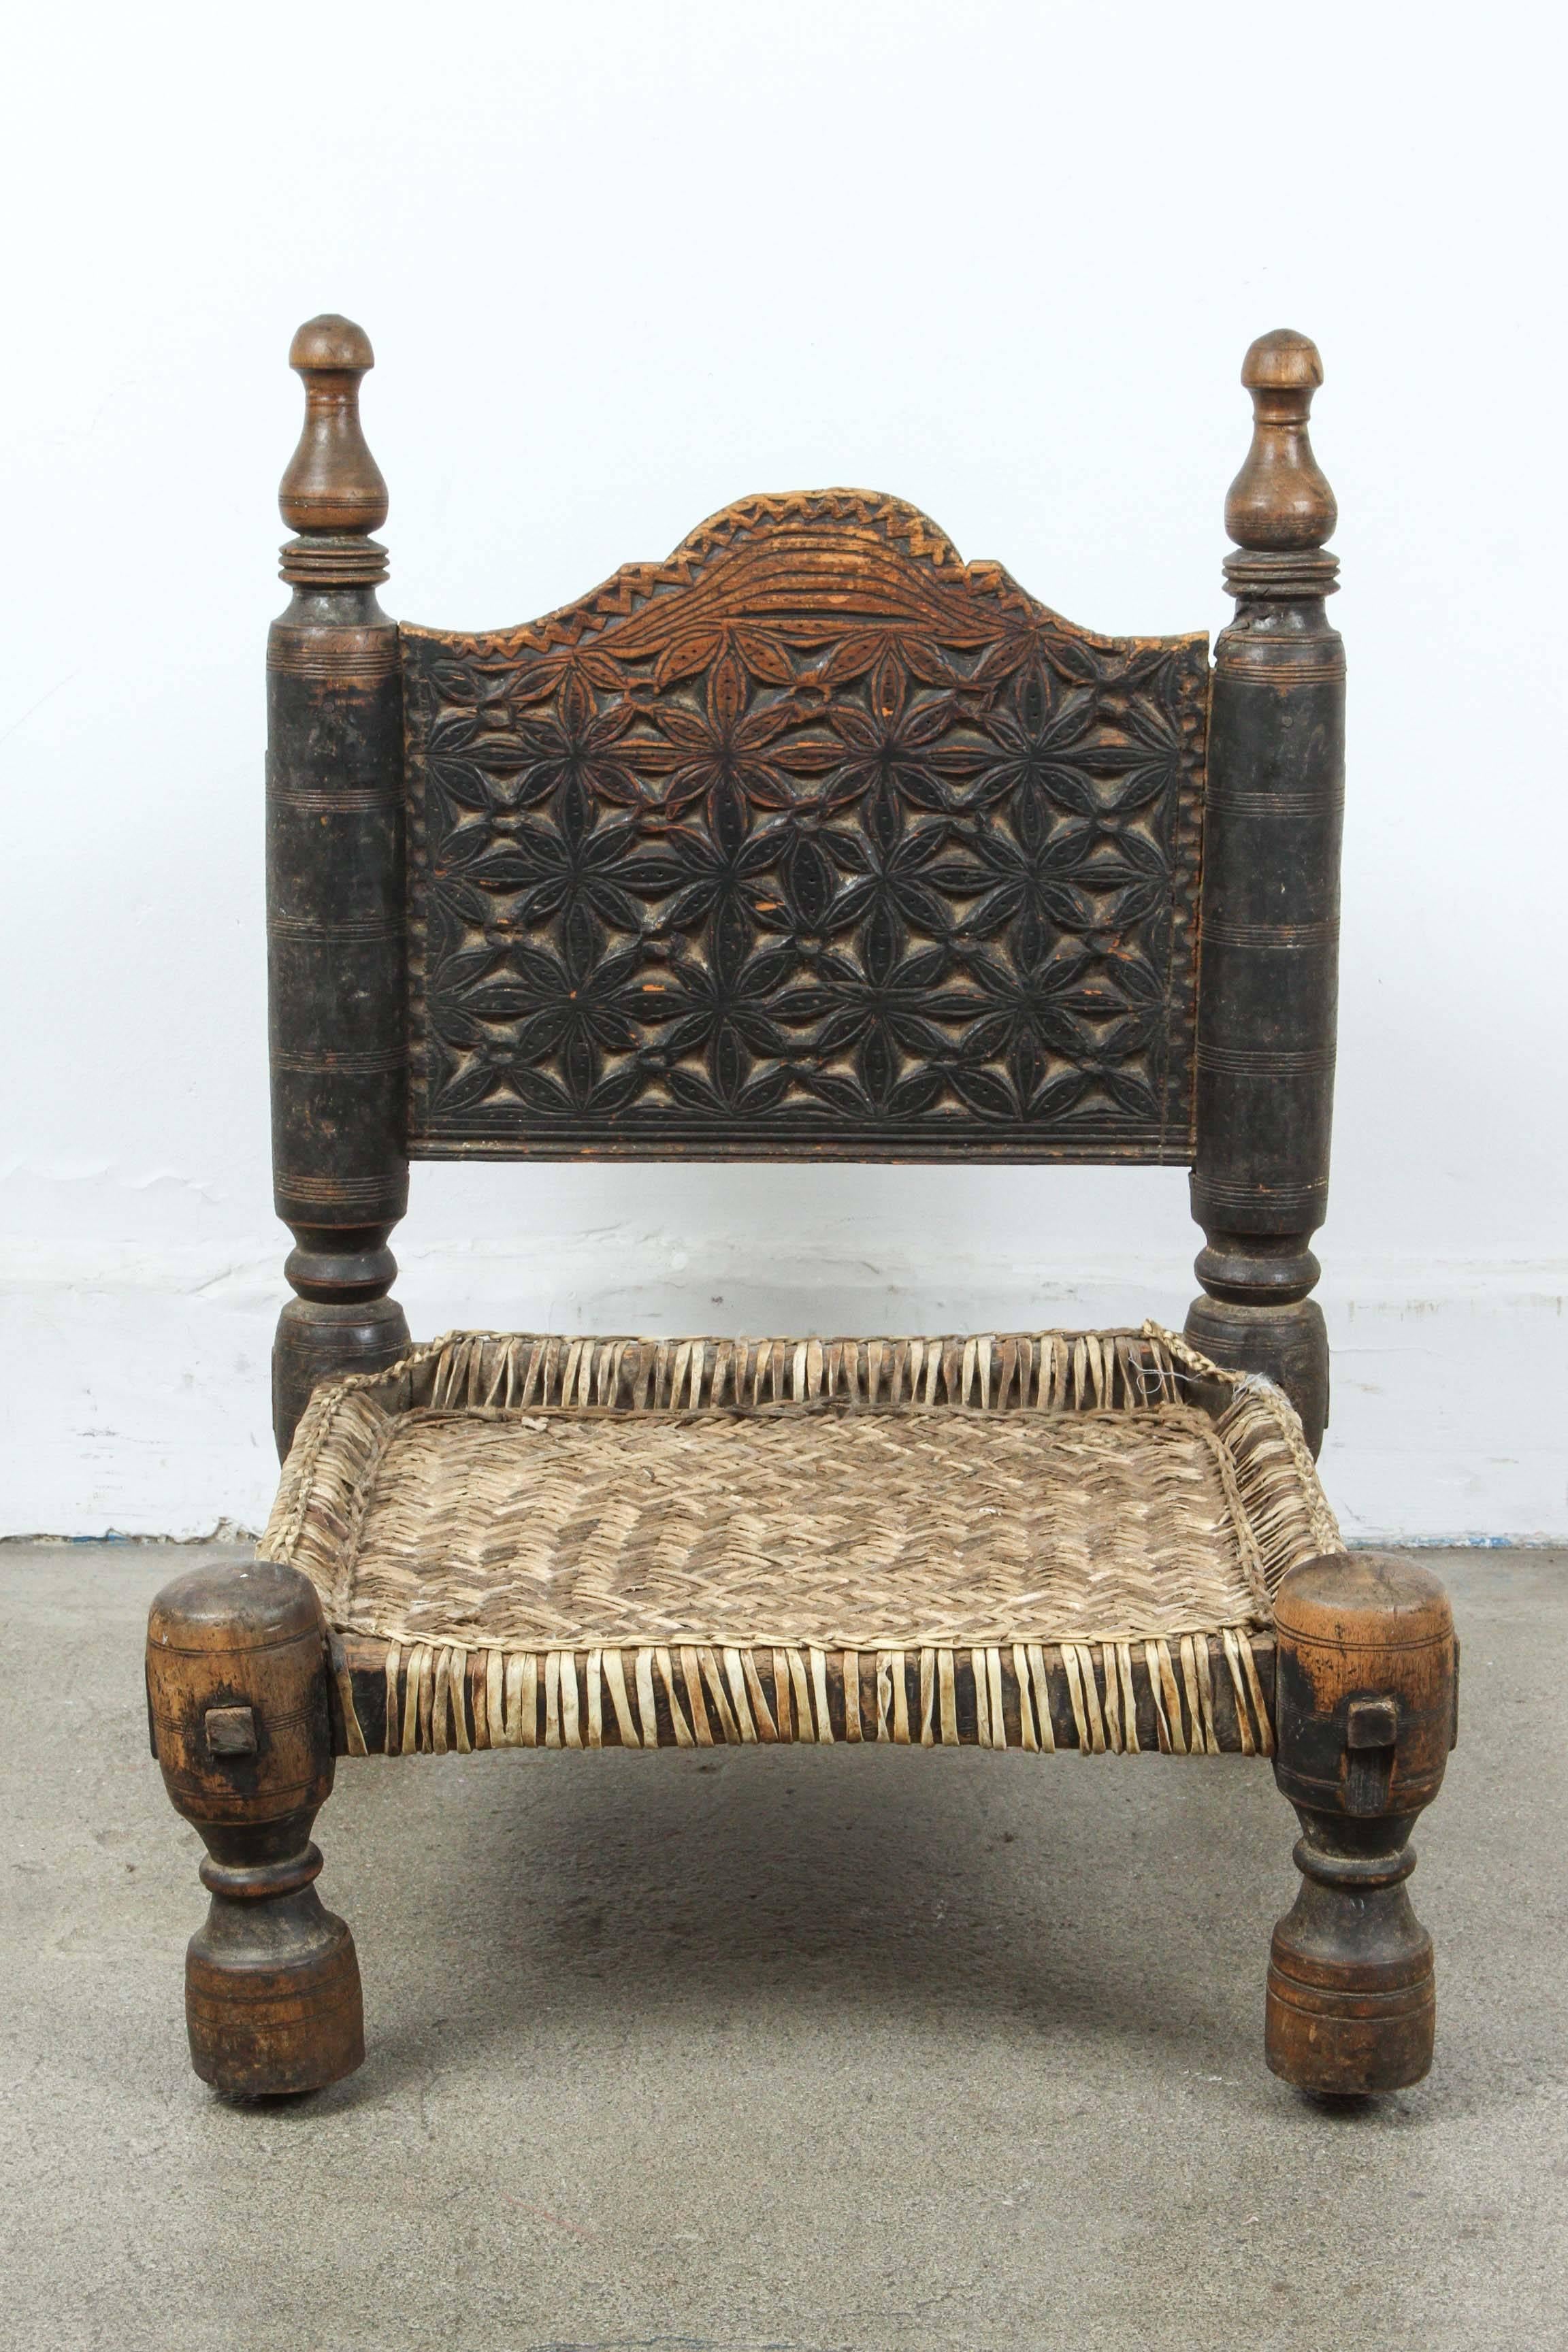 African low tribal chair, hand-carved with primitive design in the back and front, low turned legs.
The seat is made of woven leather.